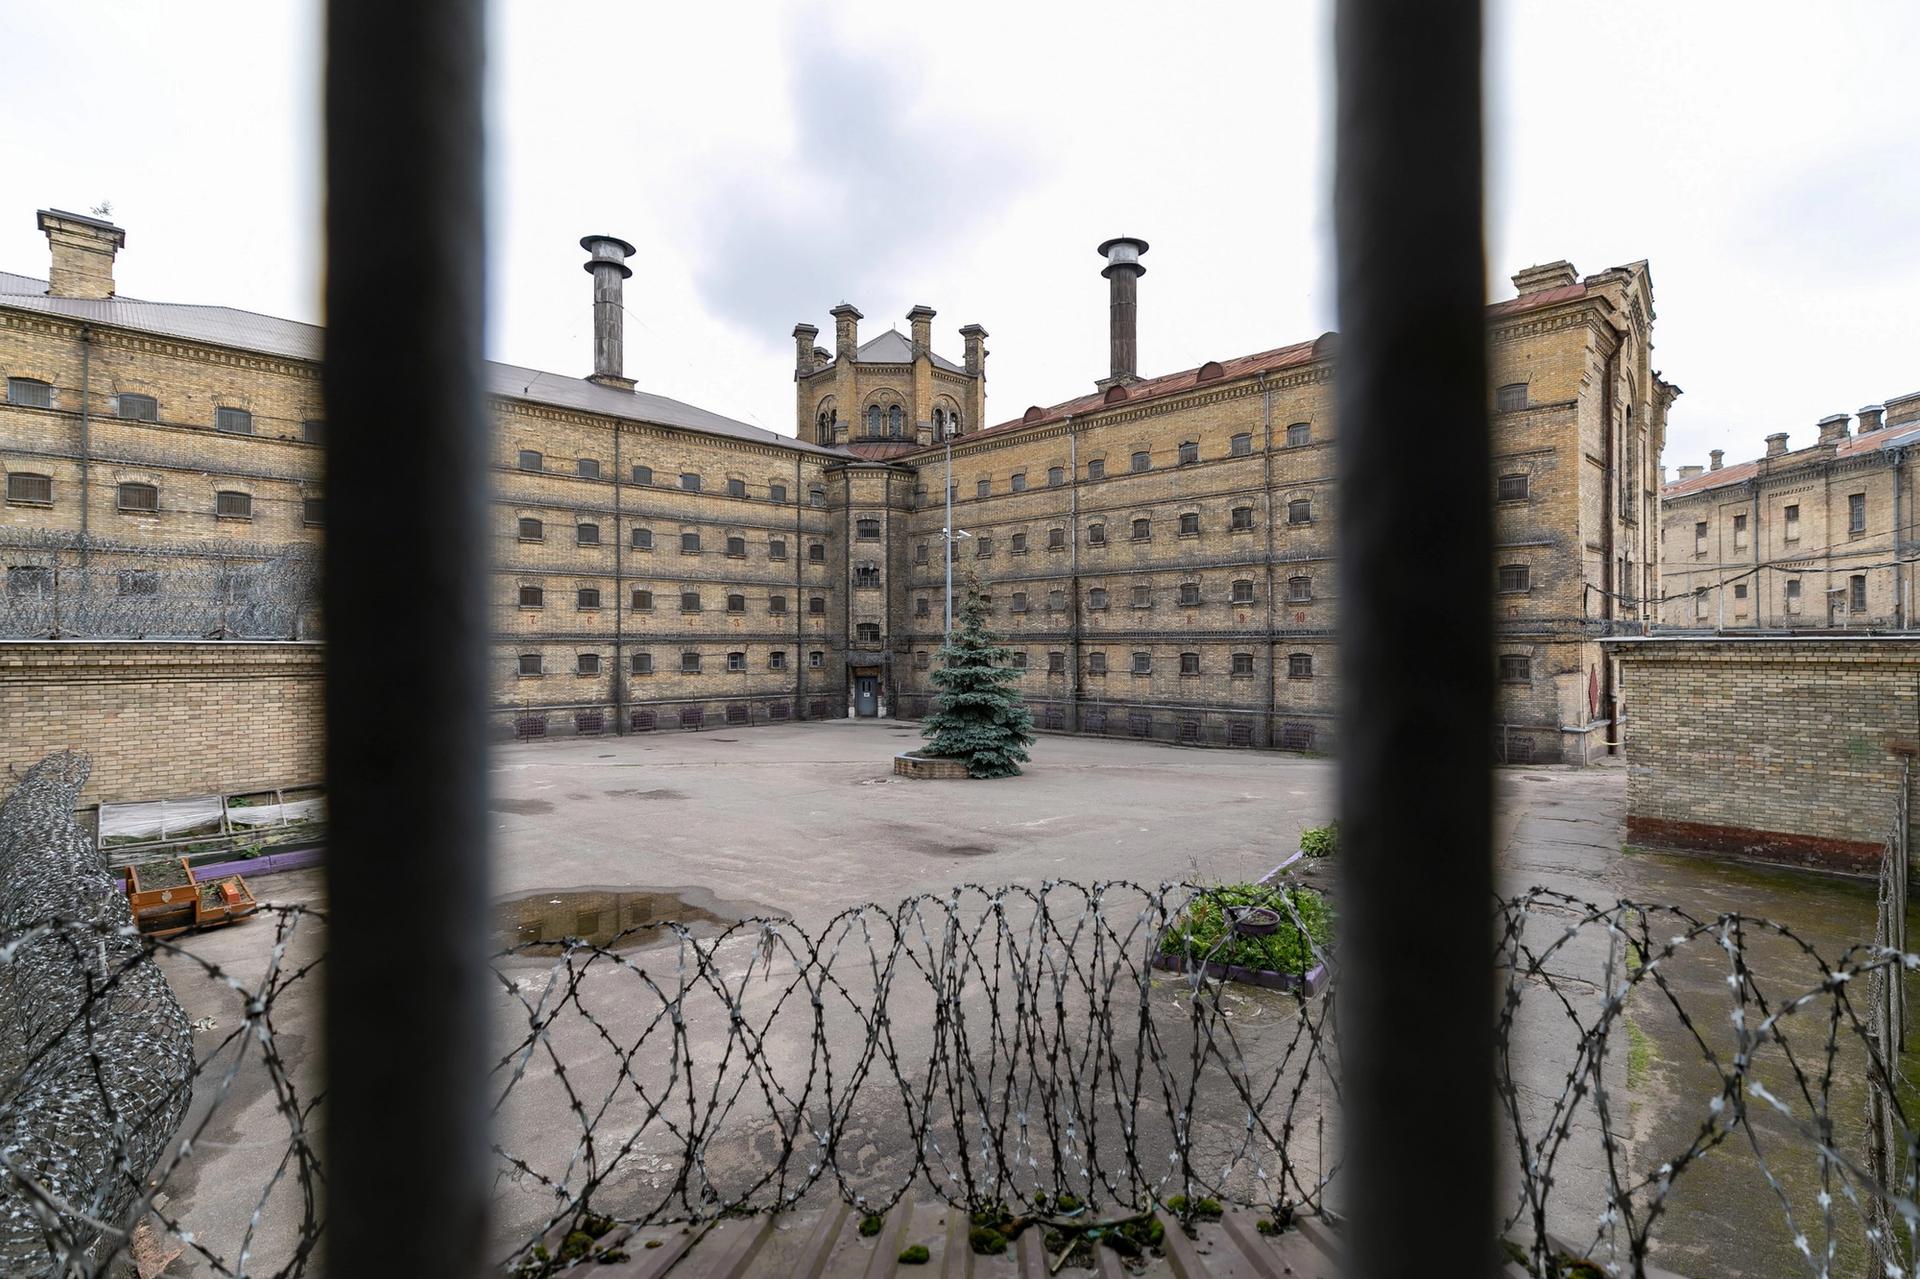 The Lukiškės prison building was built in 1904 and closed its doors in 2019 